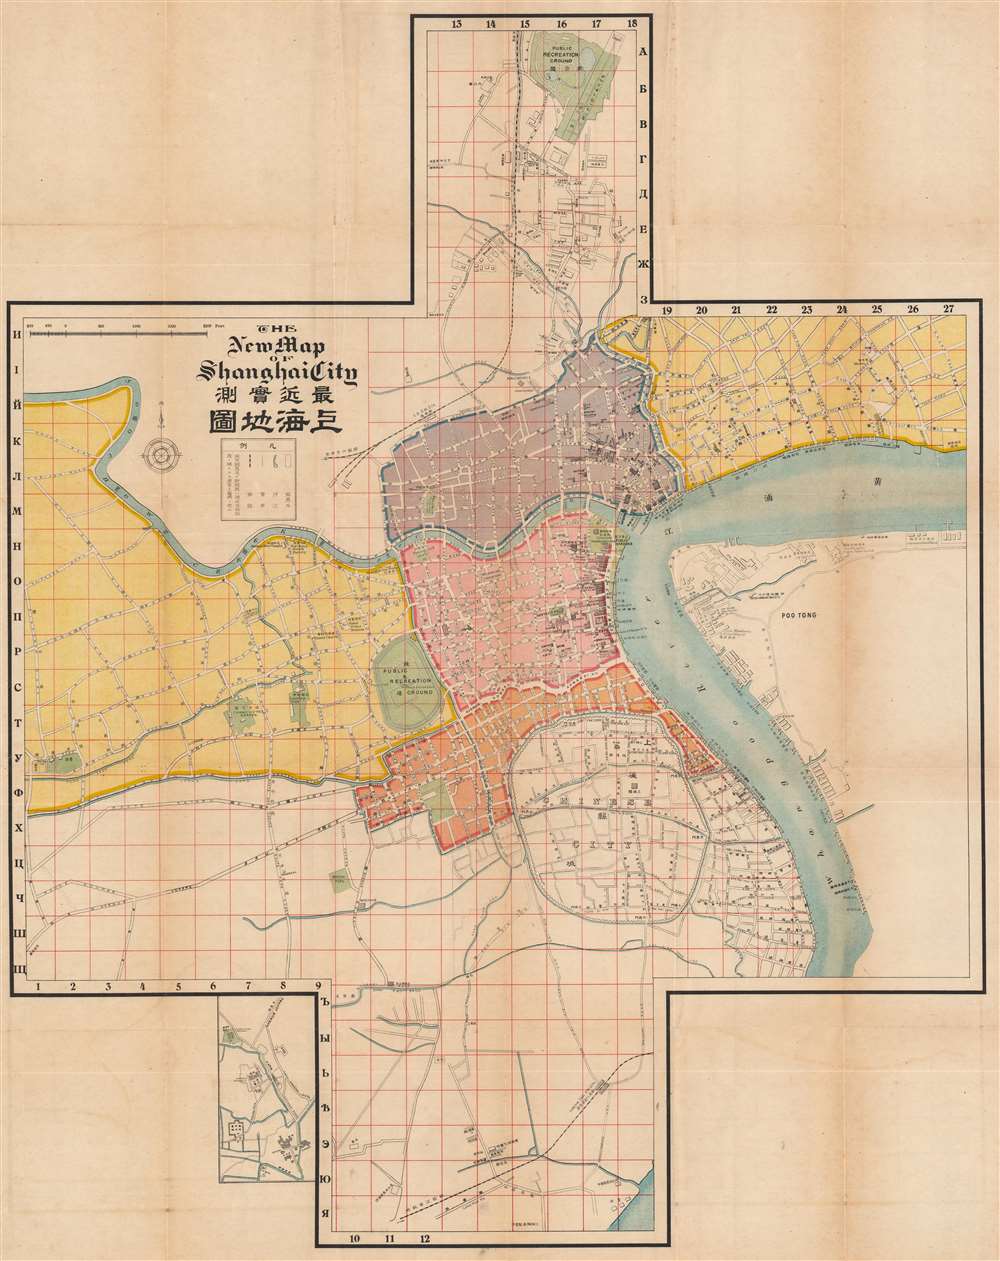 The New Map of Shanghai City / 最新實測上海地圖. - Main View